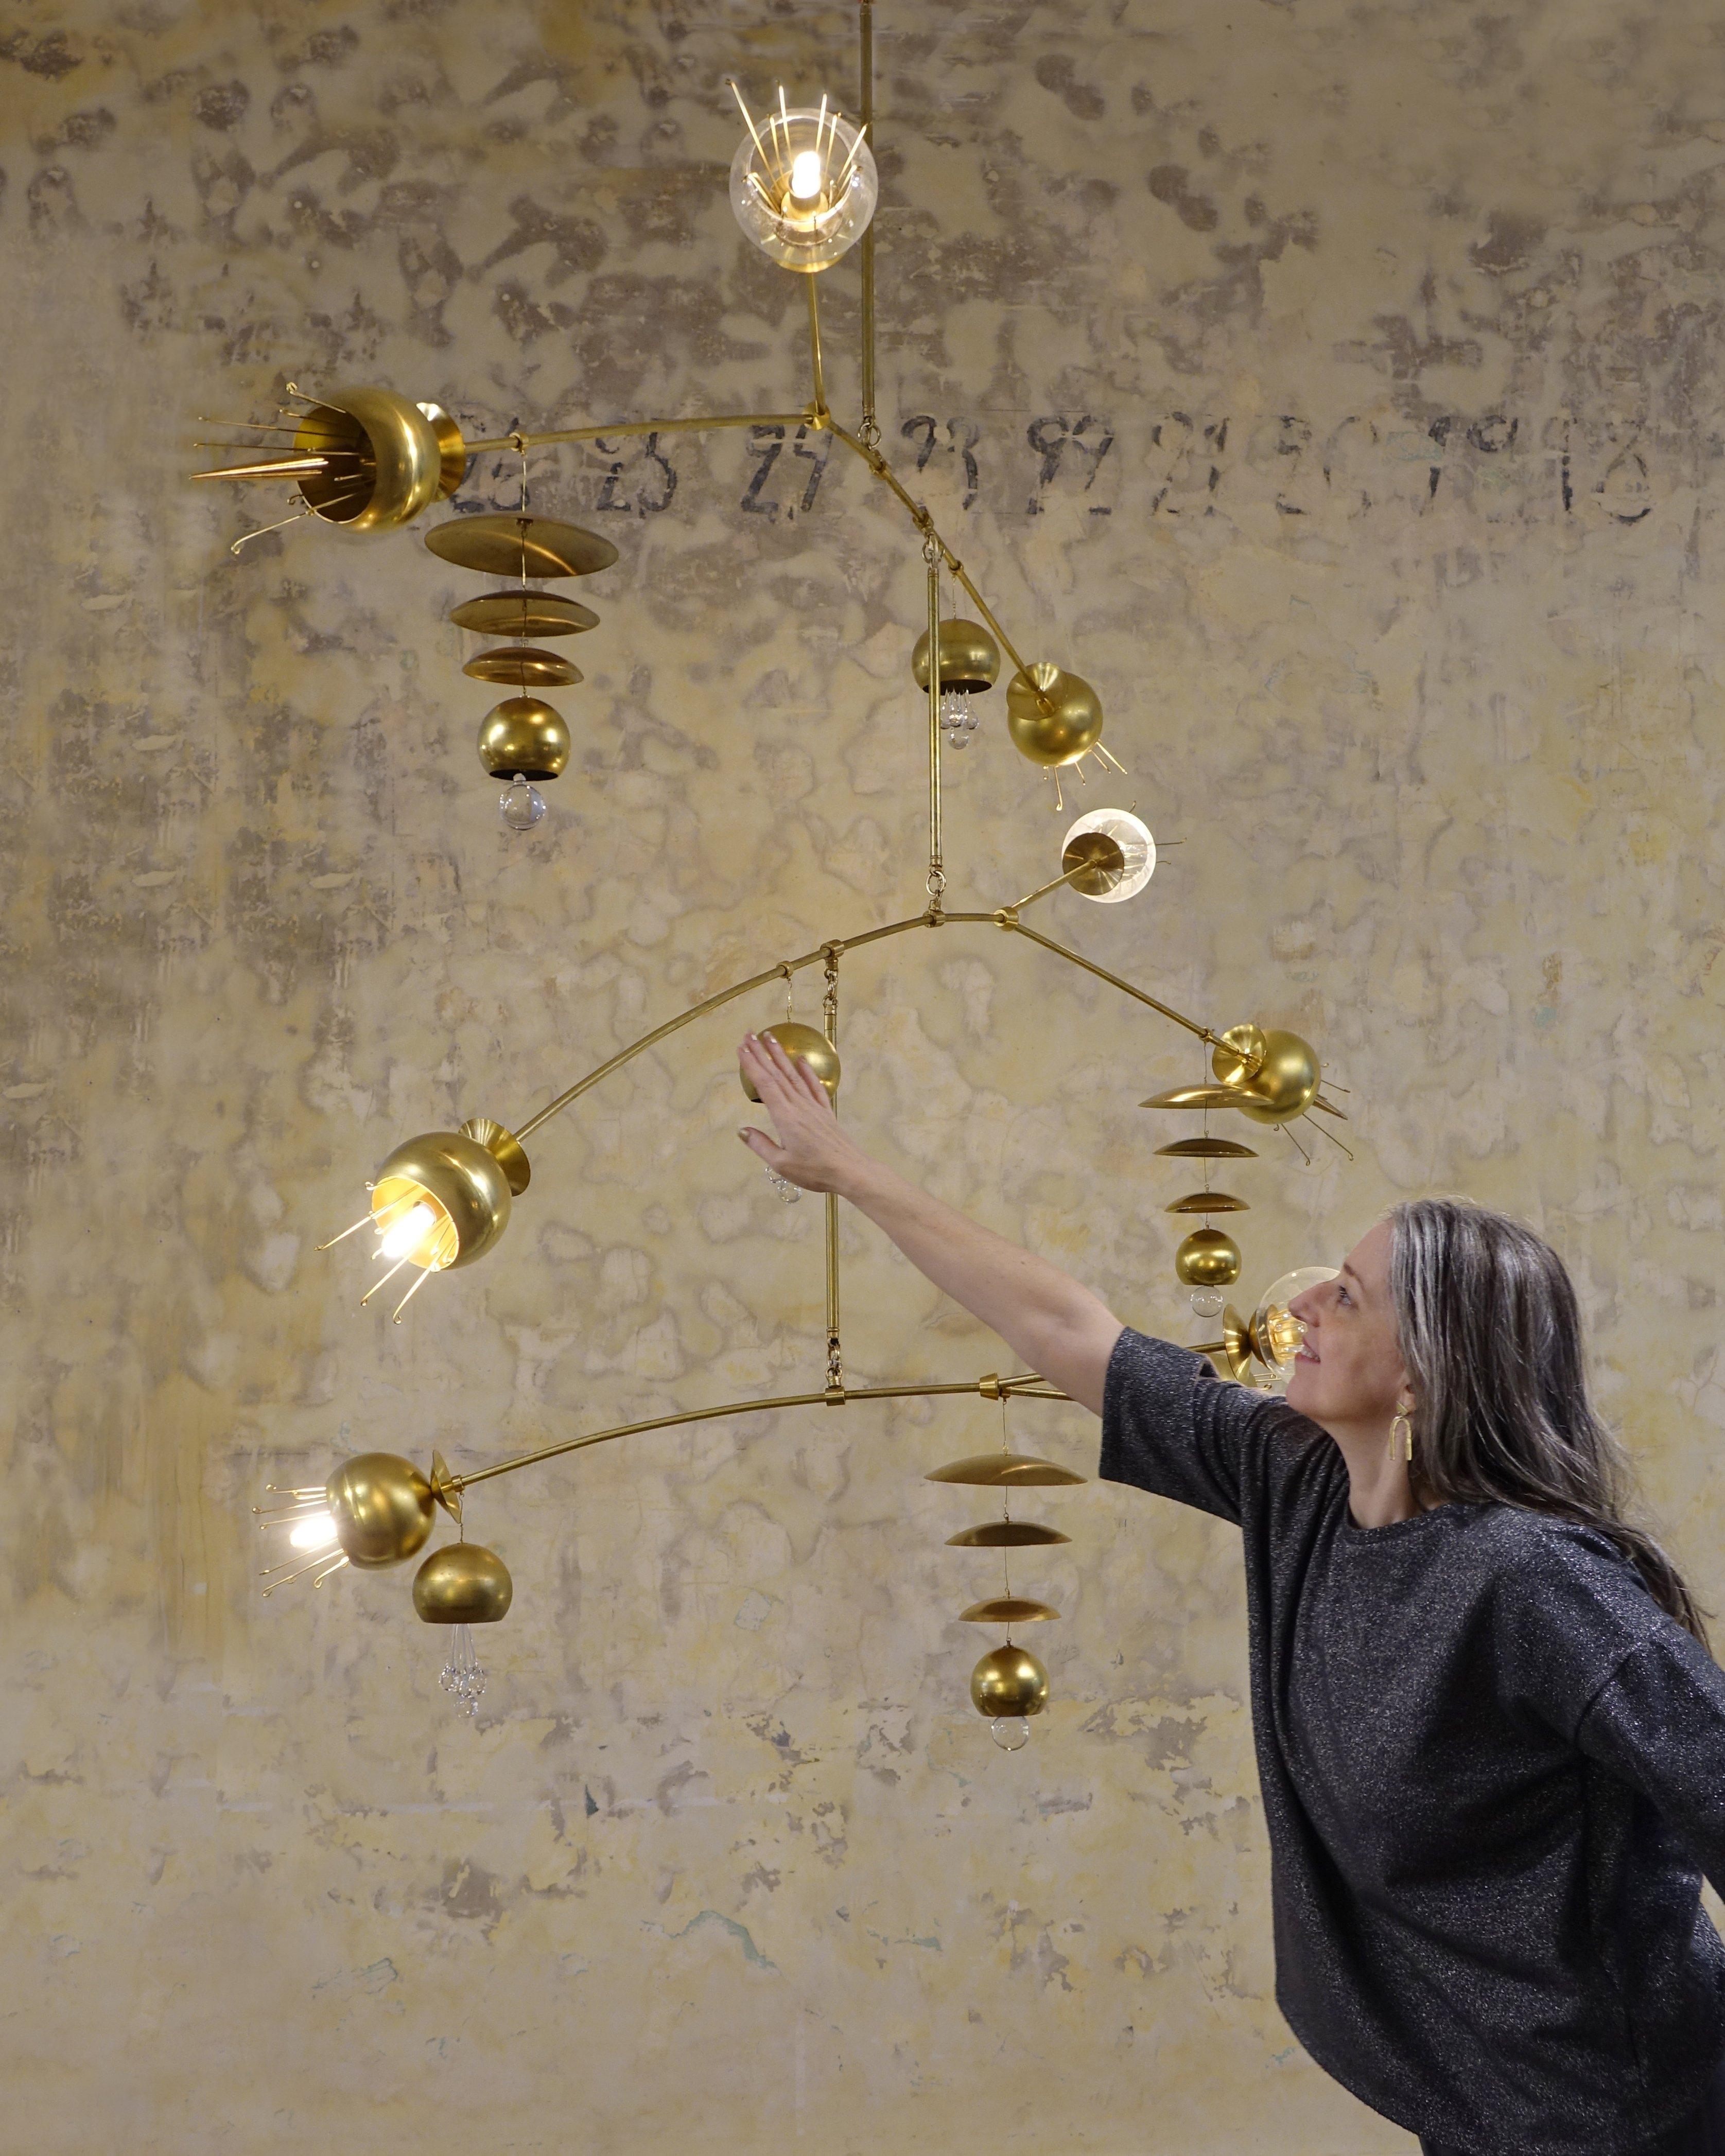 The Fleurish chandelier is a modern, organic mobile-style lighting fixture designed by Michele Varian and built in our NYC studio. It is solid brass construction with glass and crystal accents, mimicking flora from Japanese imagery. The fixture is